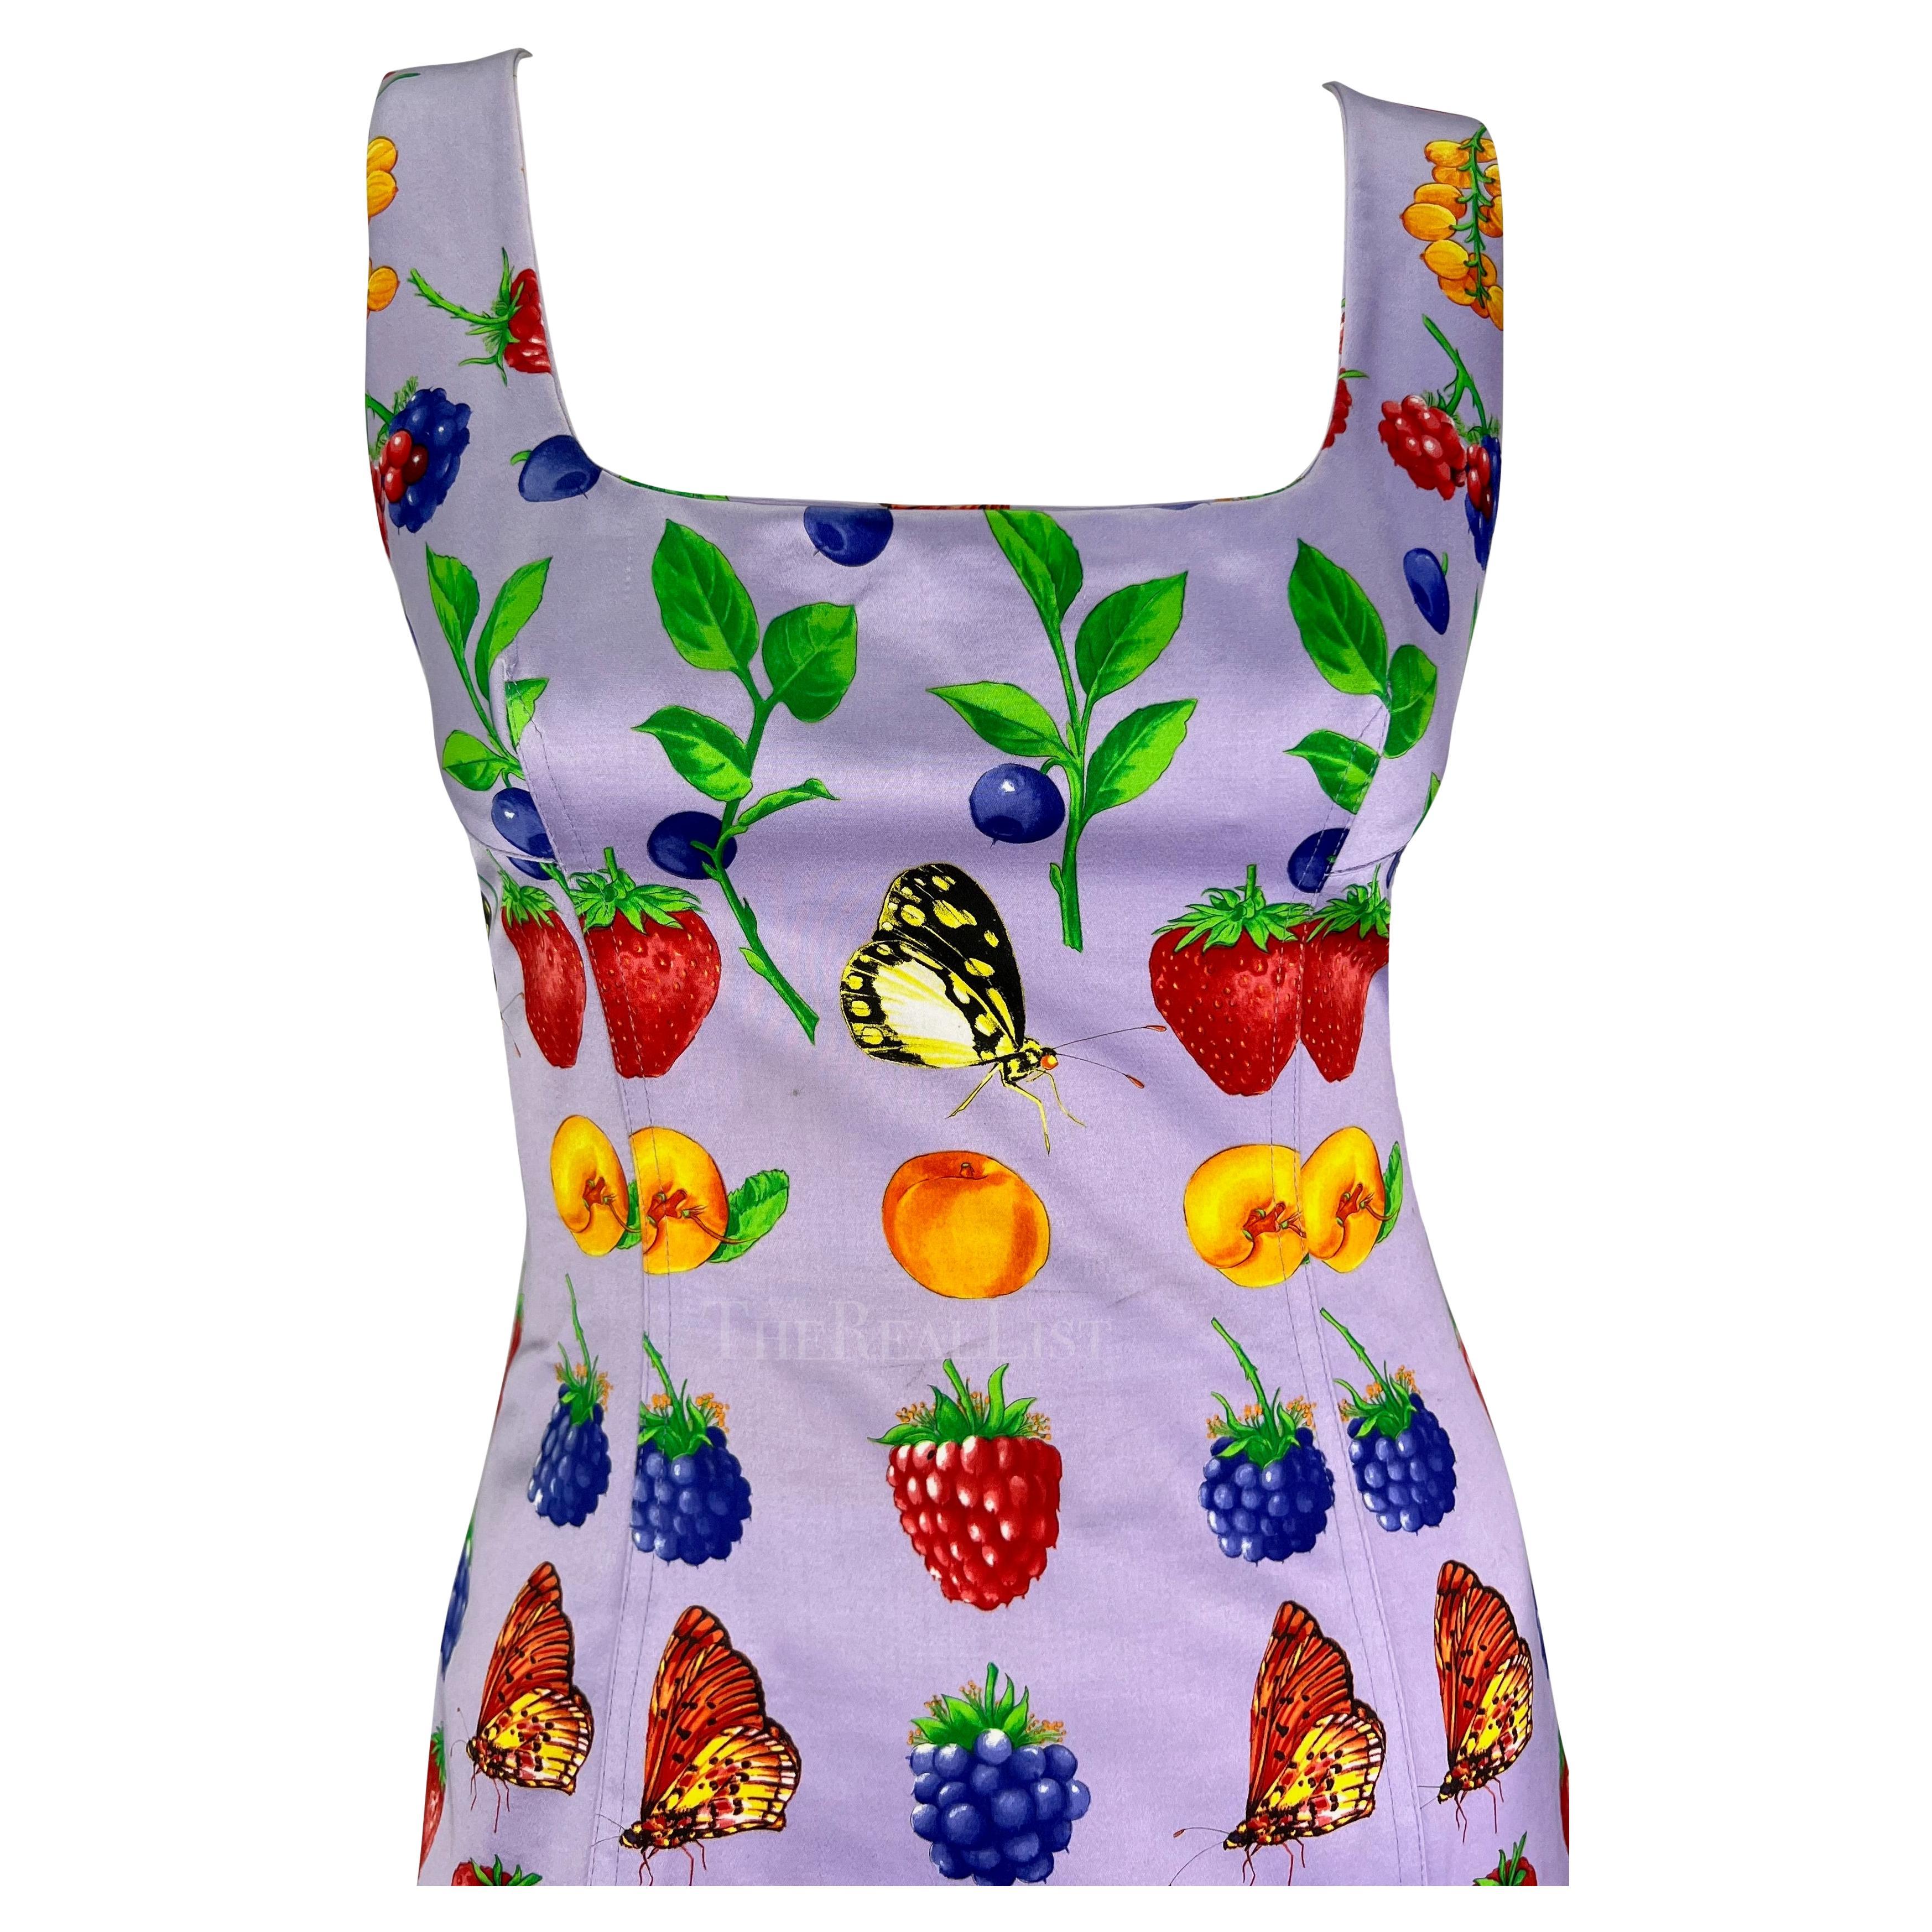 S/S 1995 Gianni Versace Butterfly Berry Garden Print Lavender Pencil Dress For Sale 2